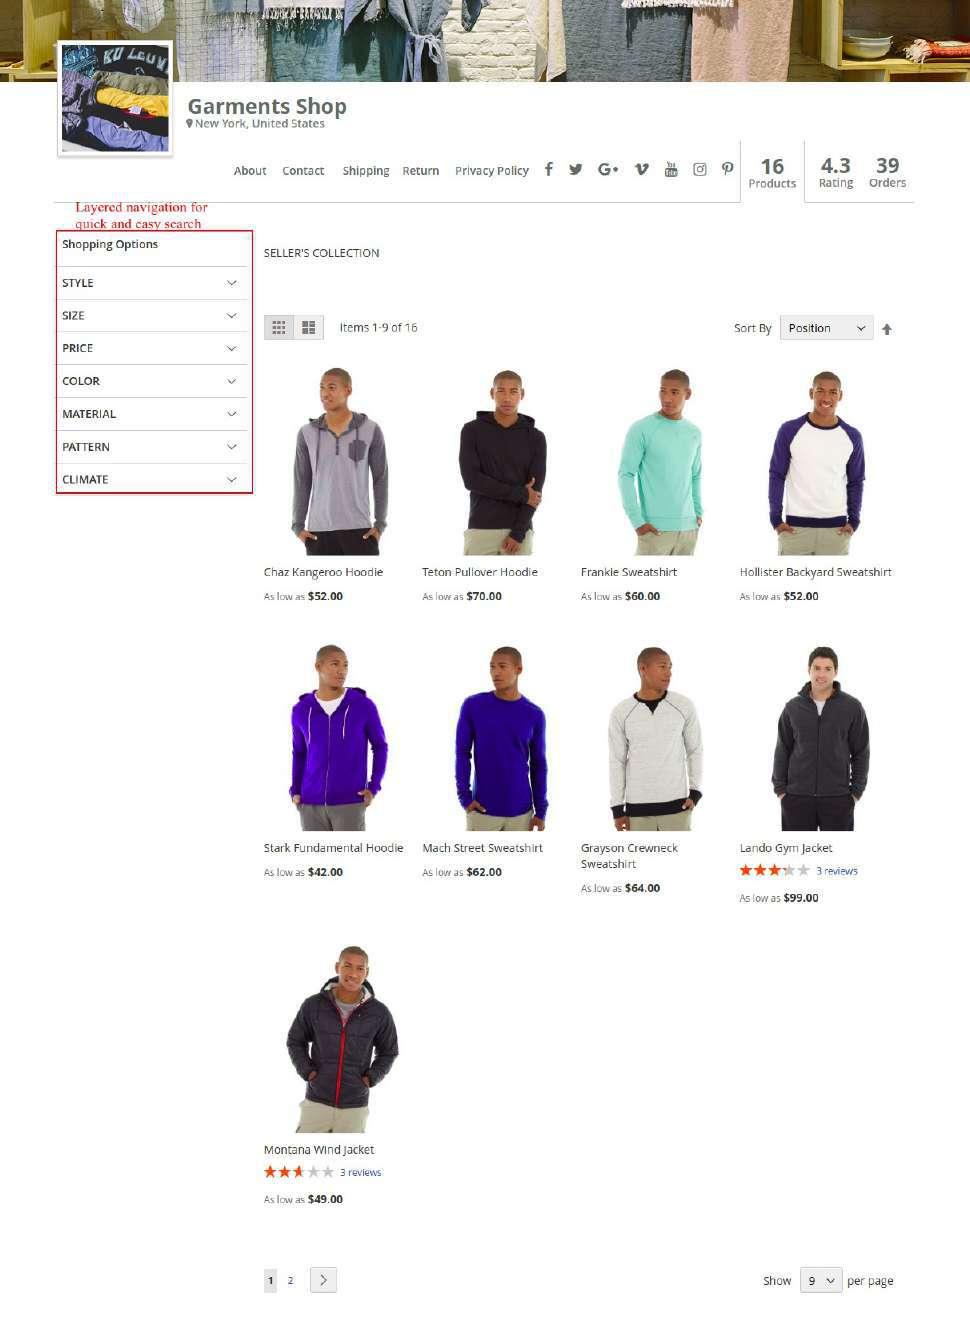 Seller s Collection Page When user will click on Products or View All Products, the user will be able to see all the Seller s Product